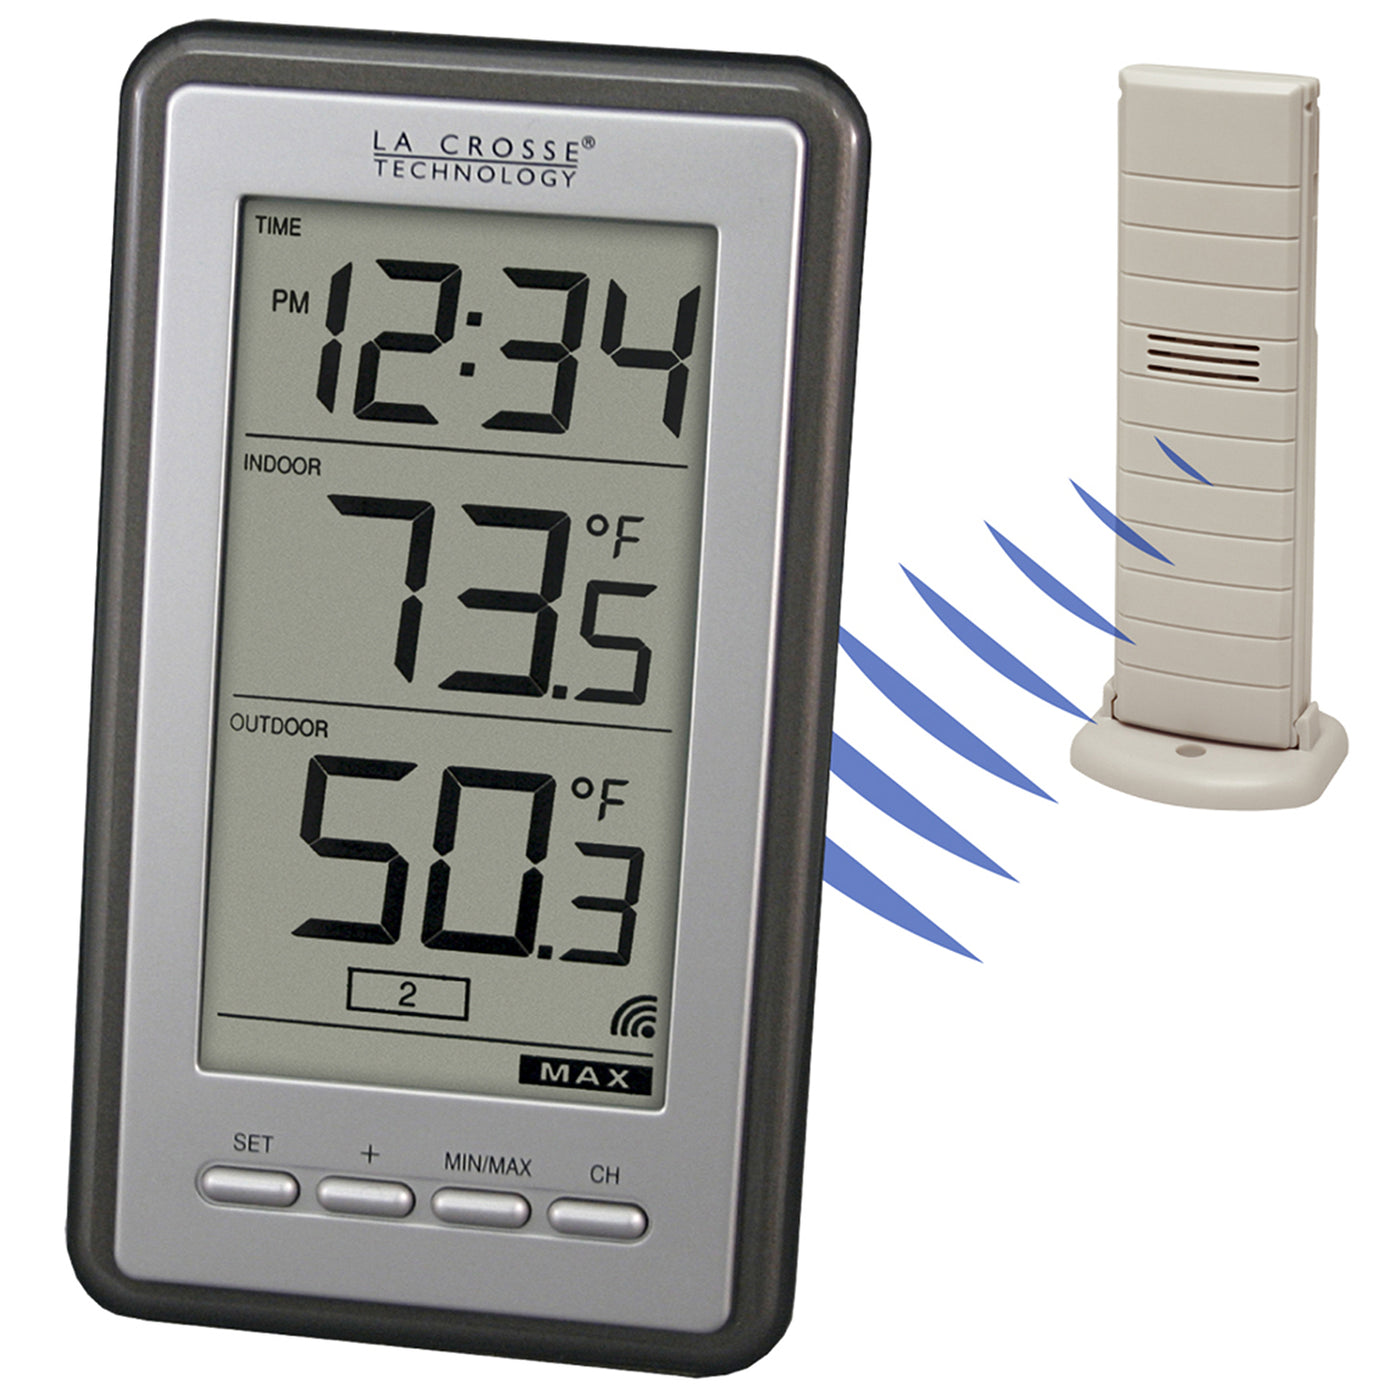 Factory New Indoor Thermometer Room Thermometer and Humidity Gauge